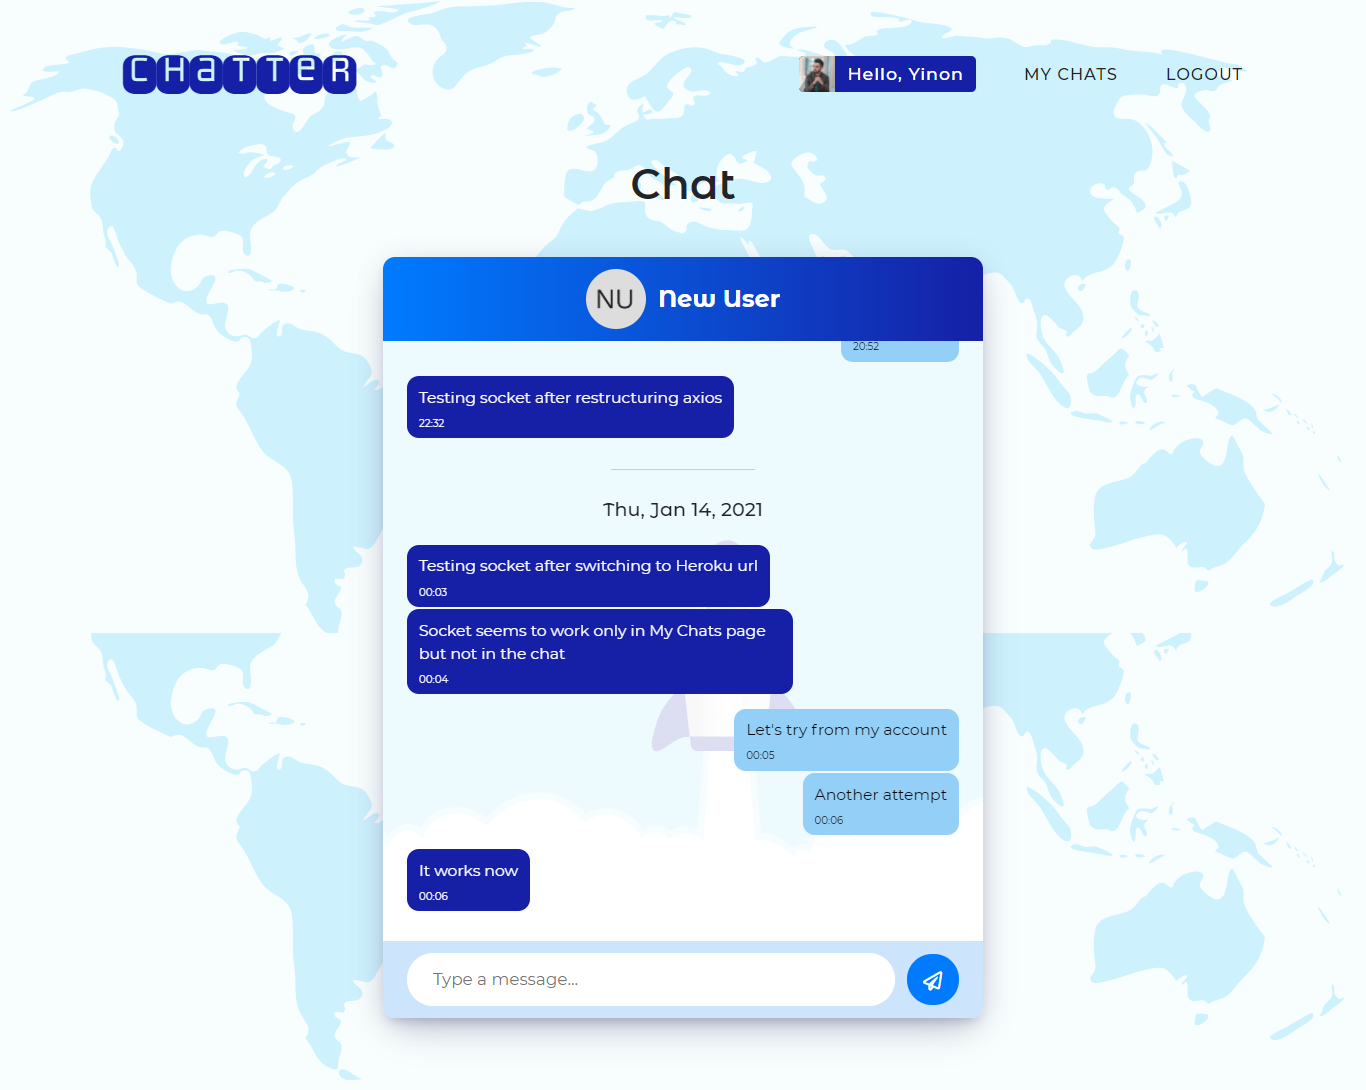 Realtime Chat App